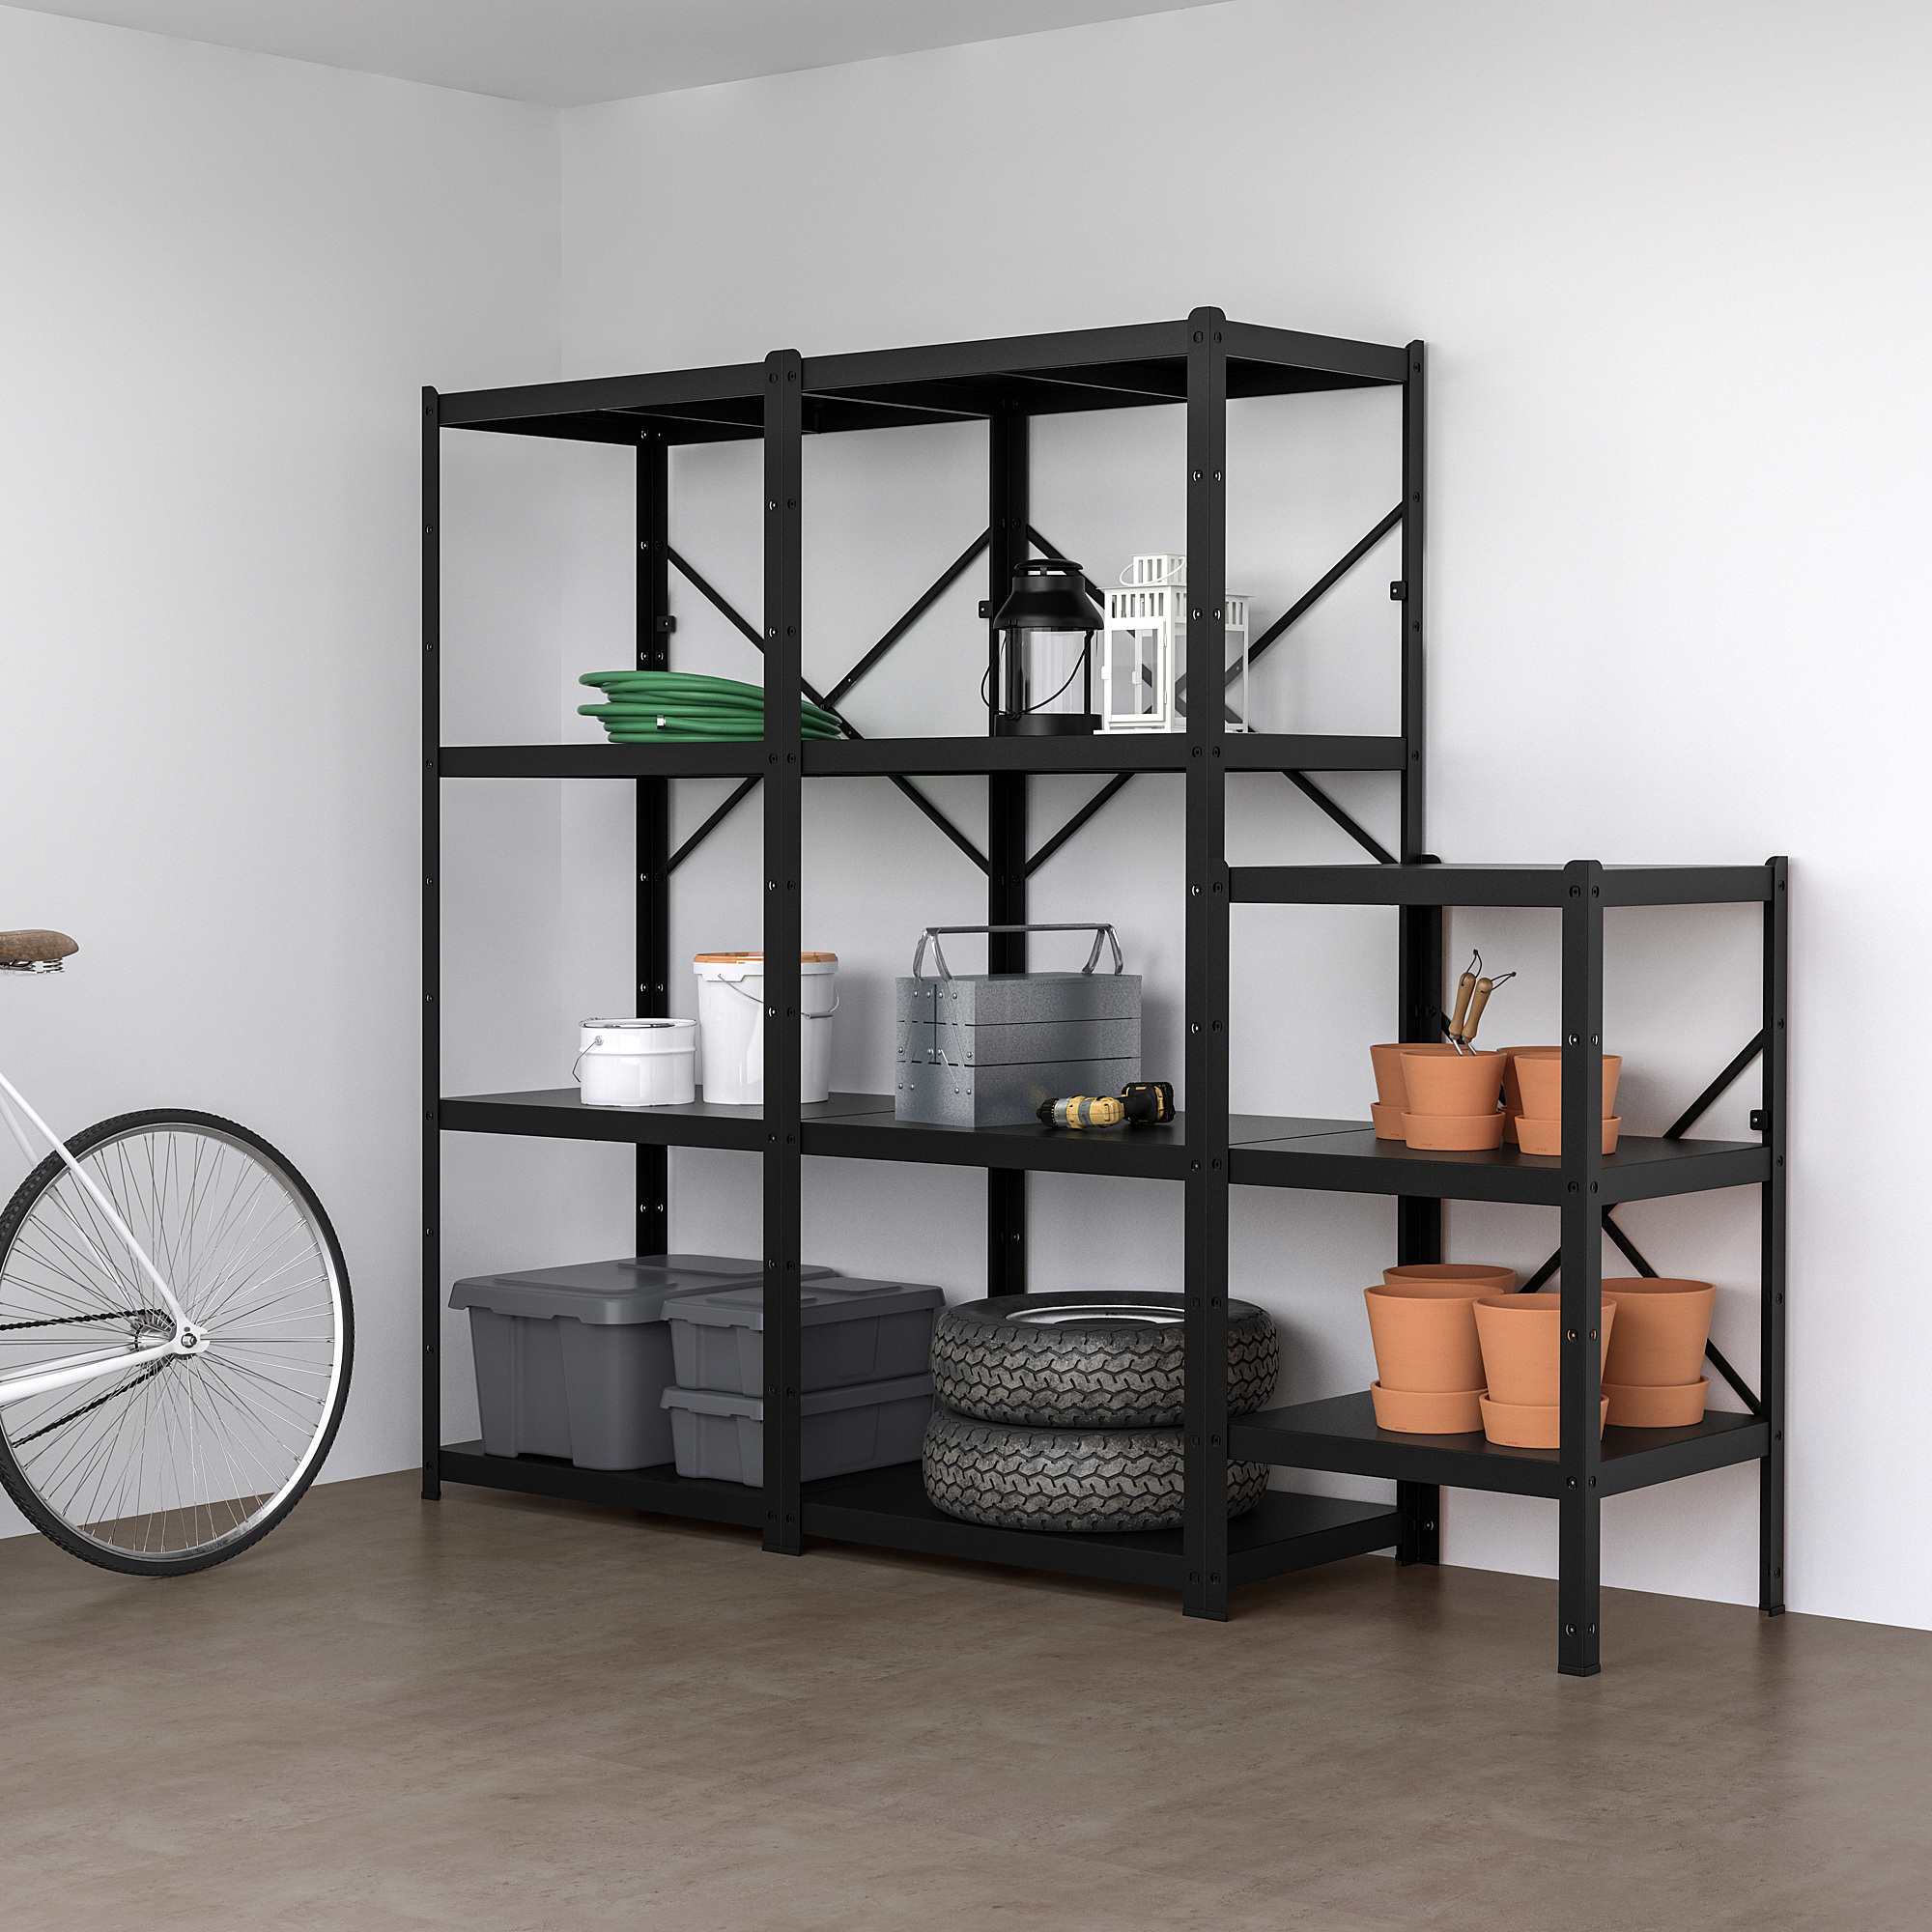 BROR 3 sections/shelves